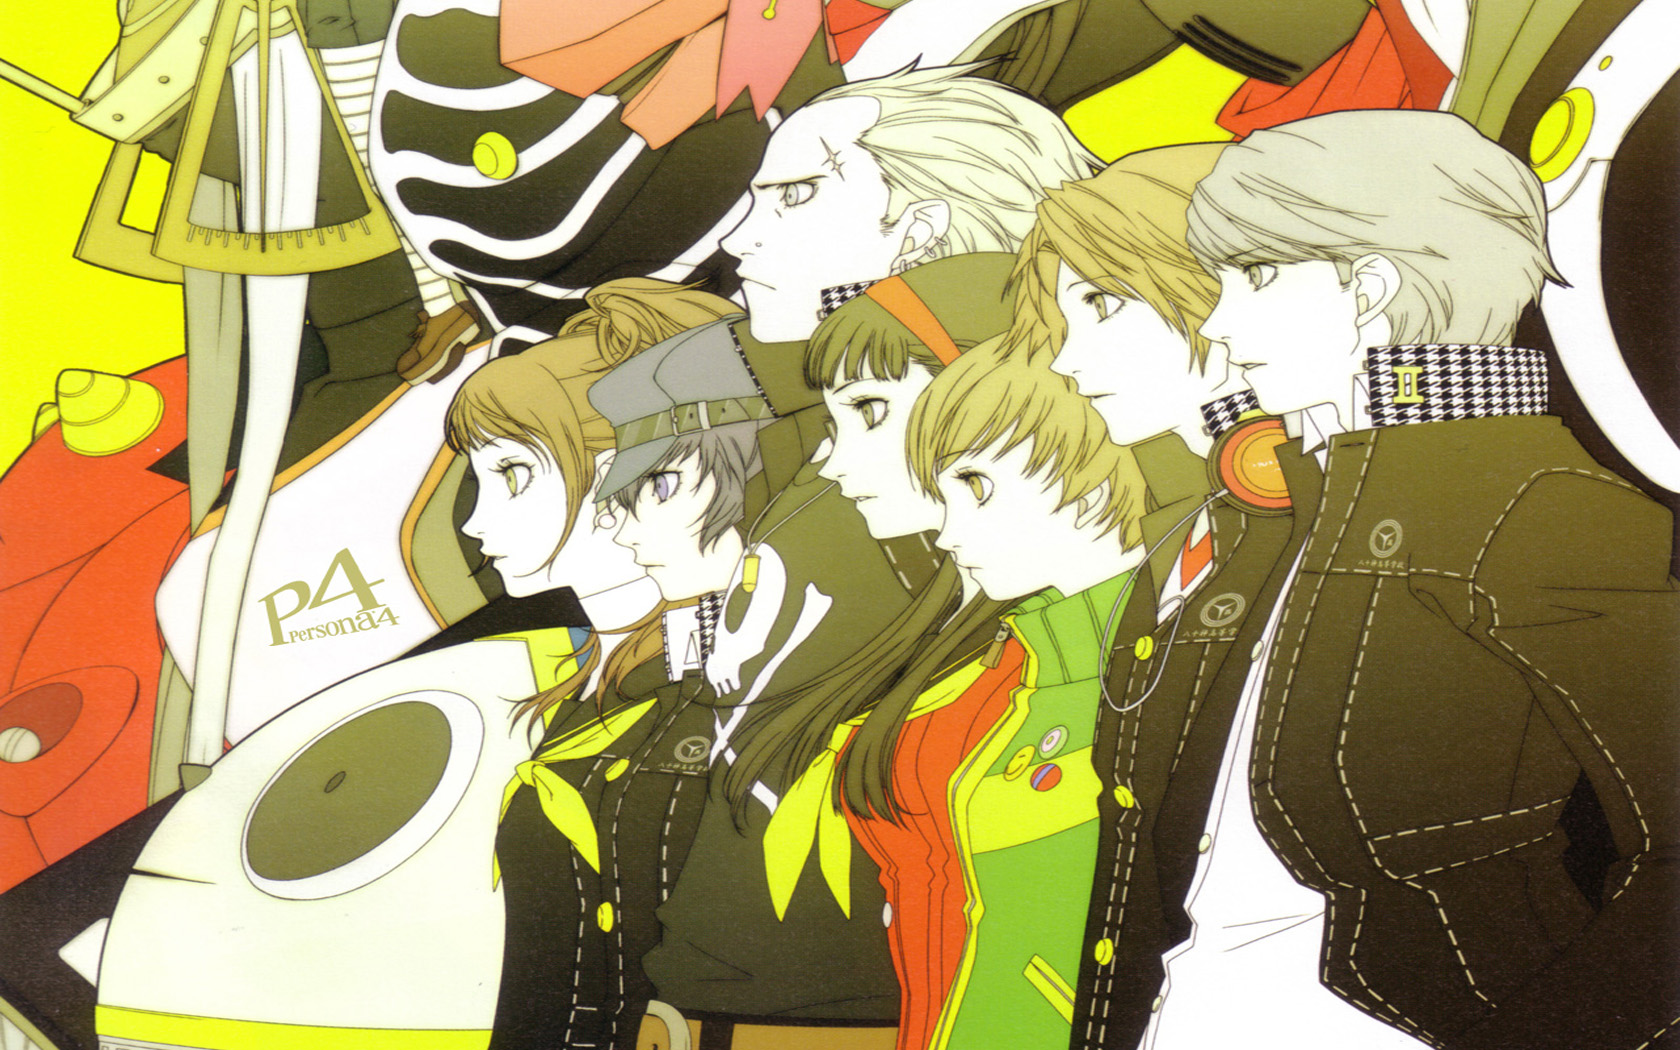 Persona 4 Wallpaper and Background Image | 1680x1050 | ID ...